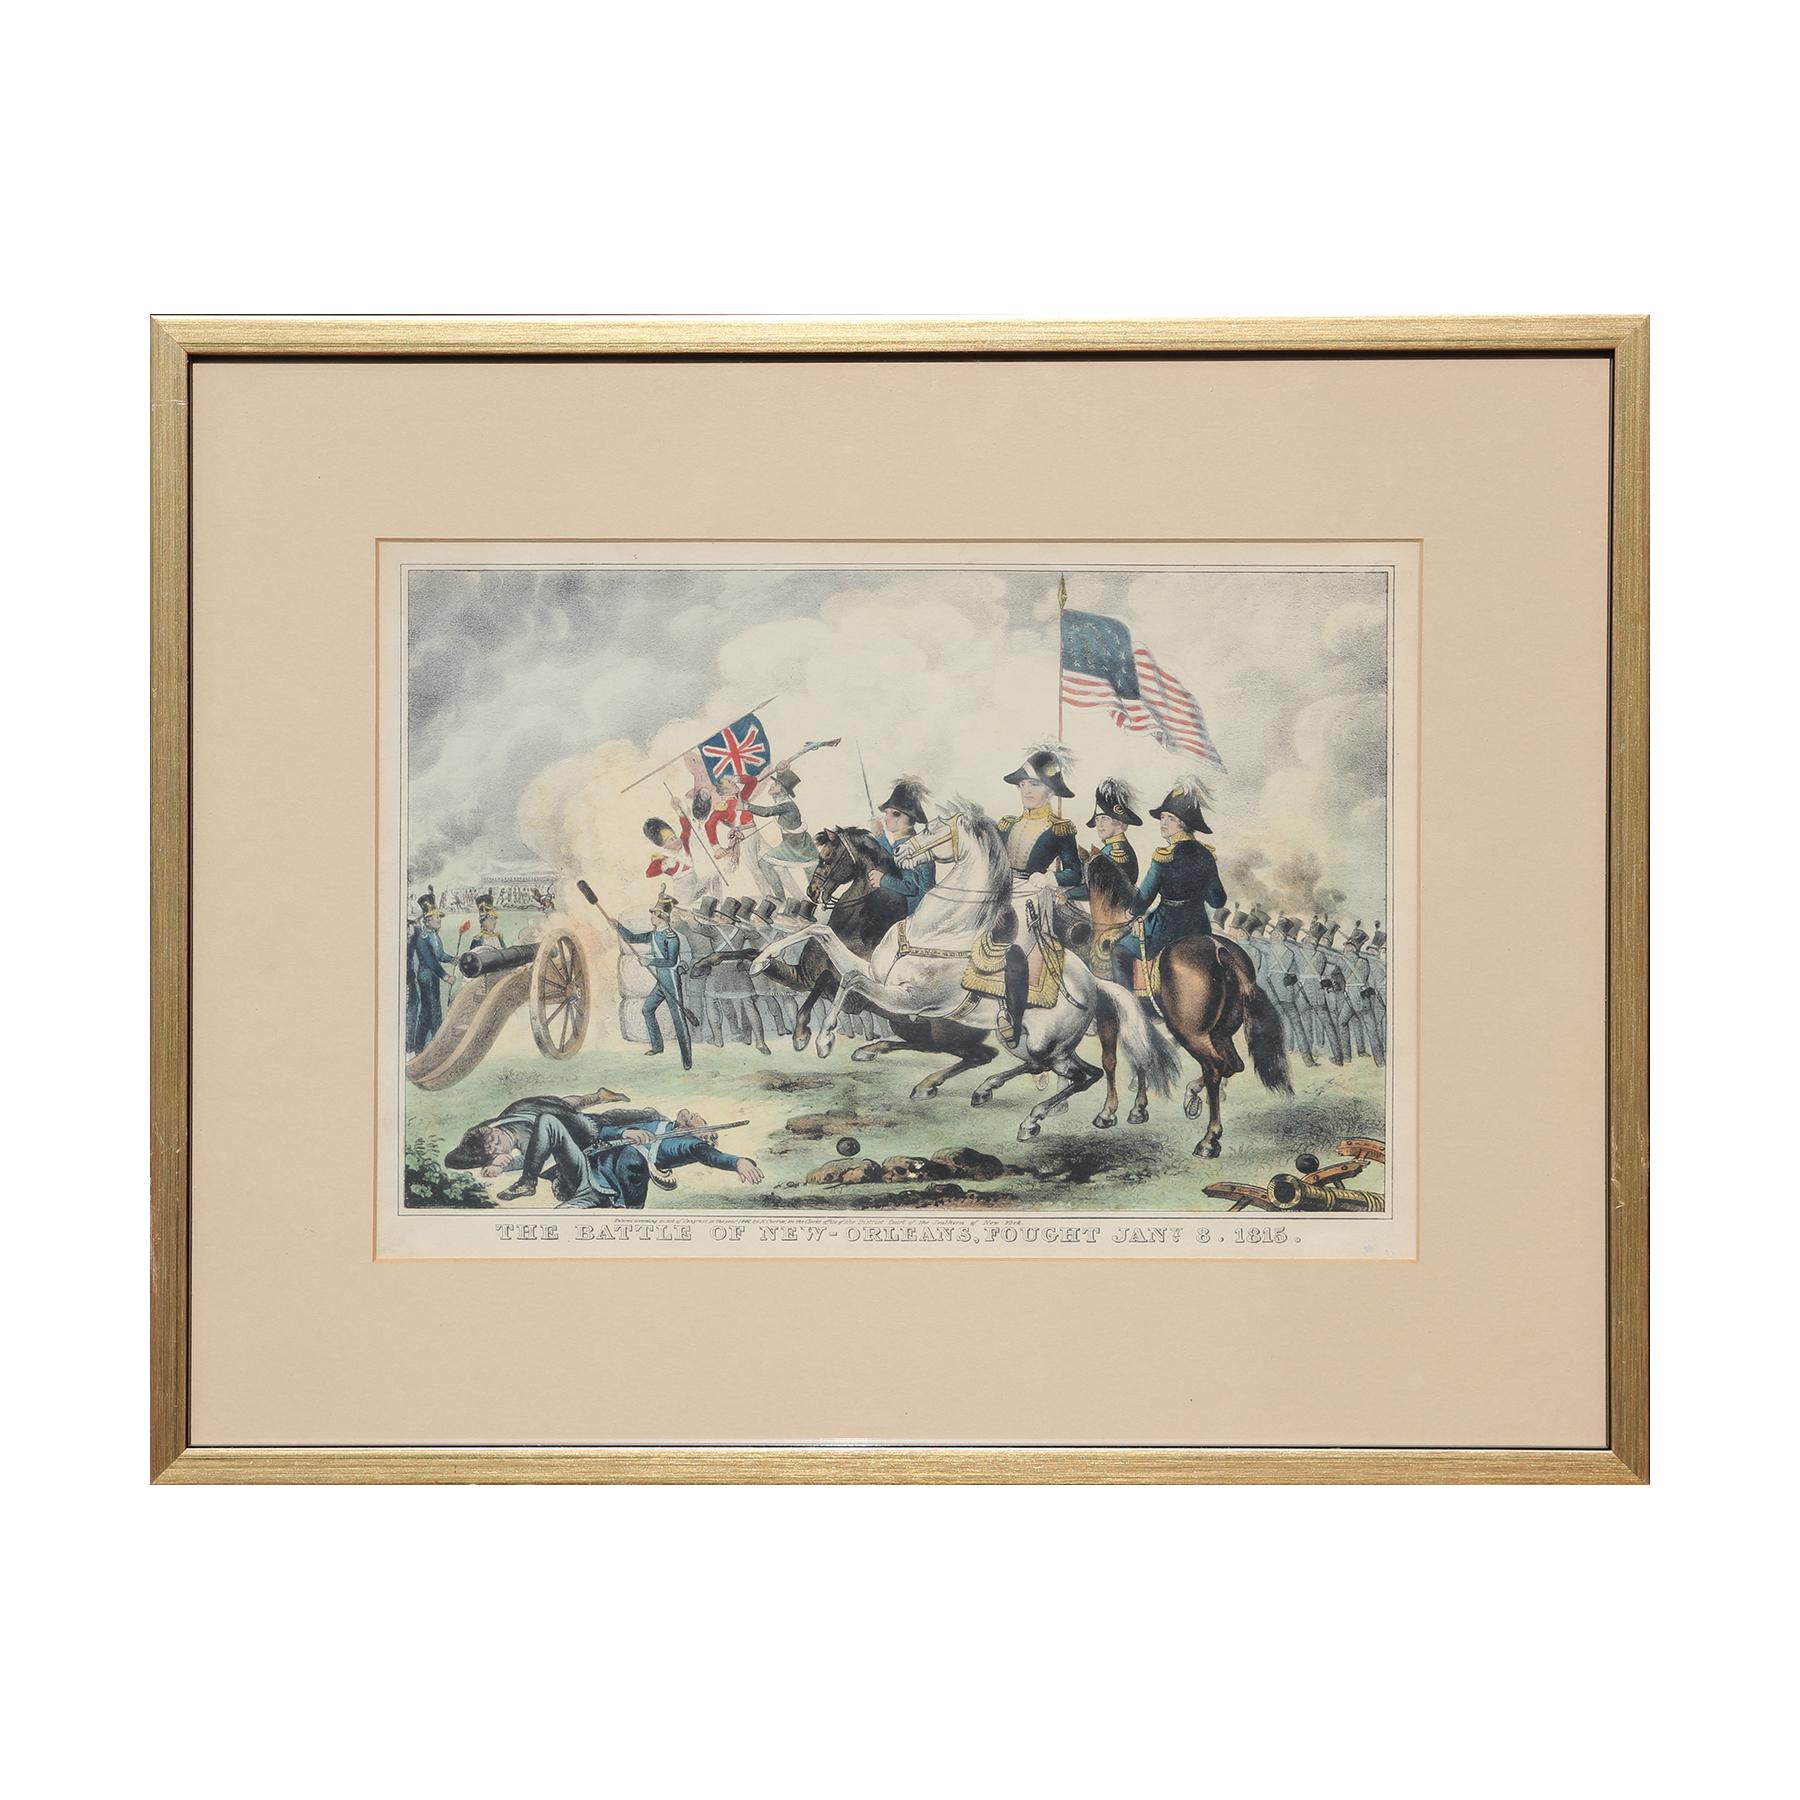 Nathaniel Currier Figurative Print - "The Battle of New Orleans 1815" Hand Colored Historical Battle Lithograph